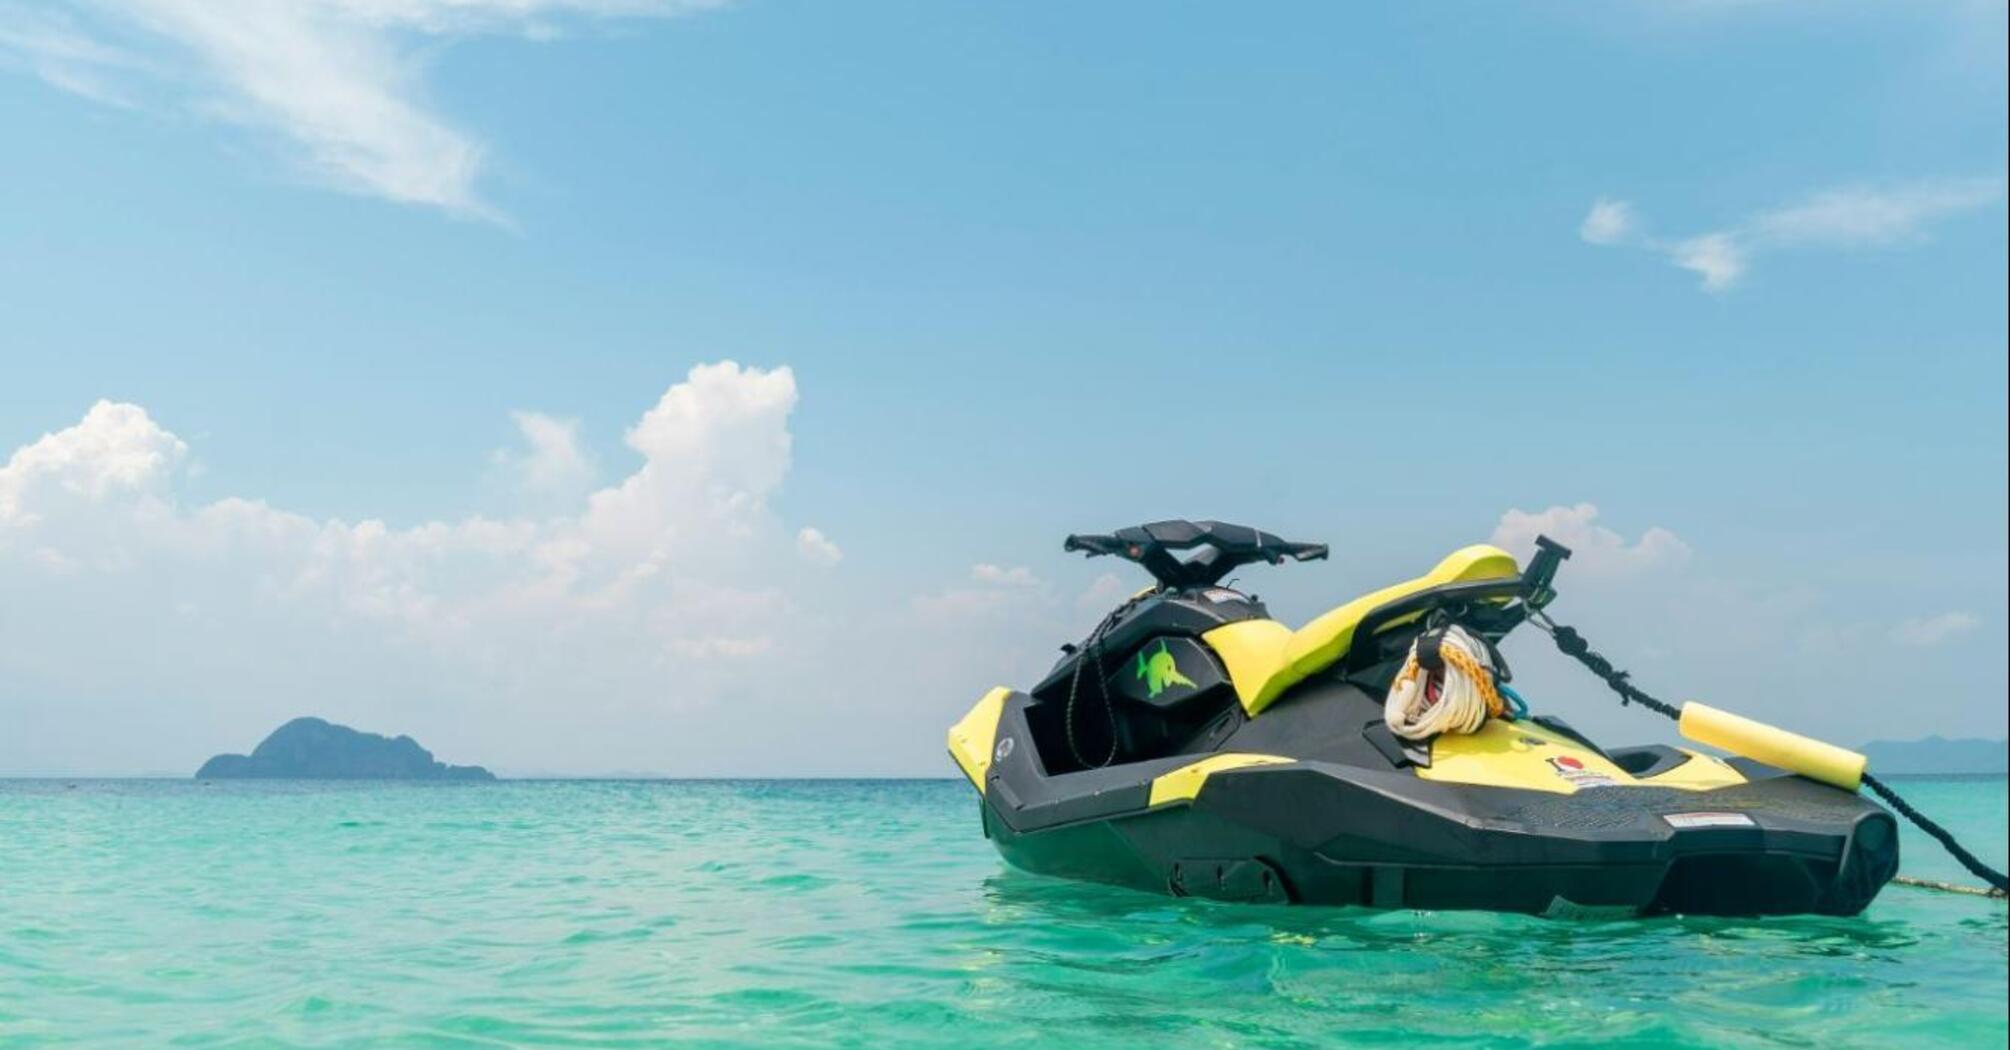 Yellow jet ski on clear water with an island in the distance